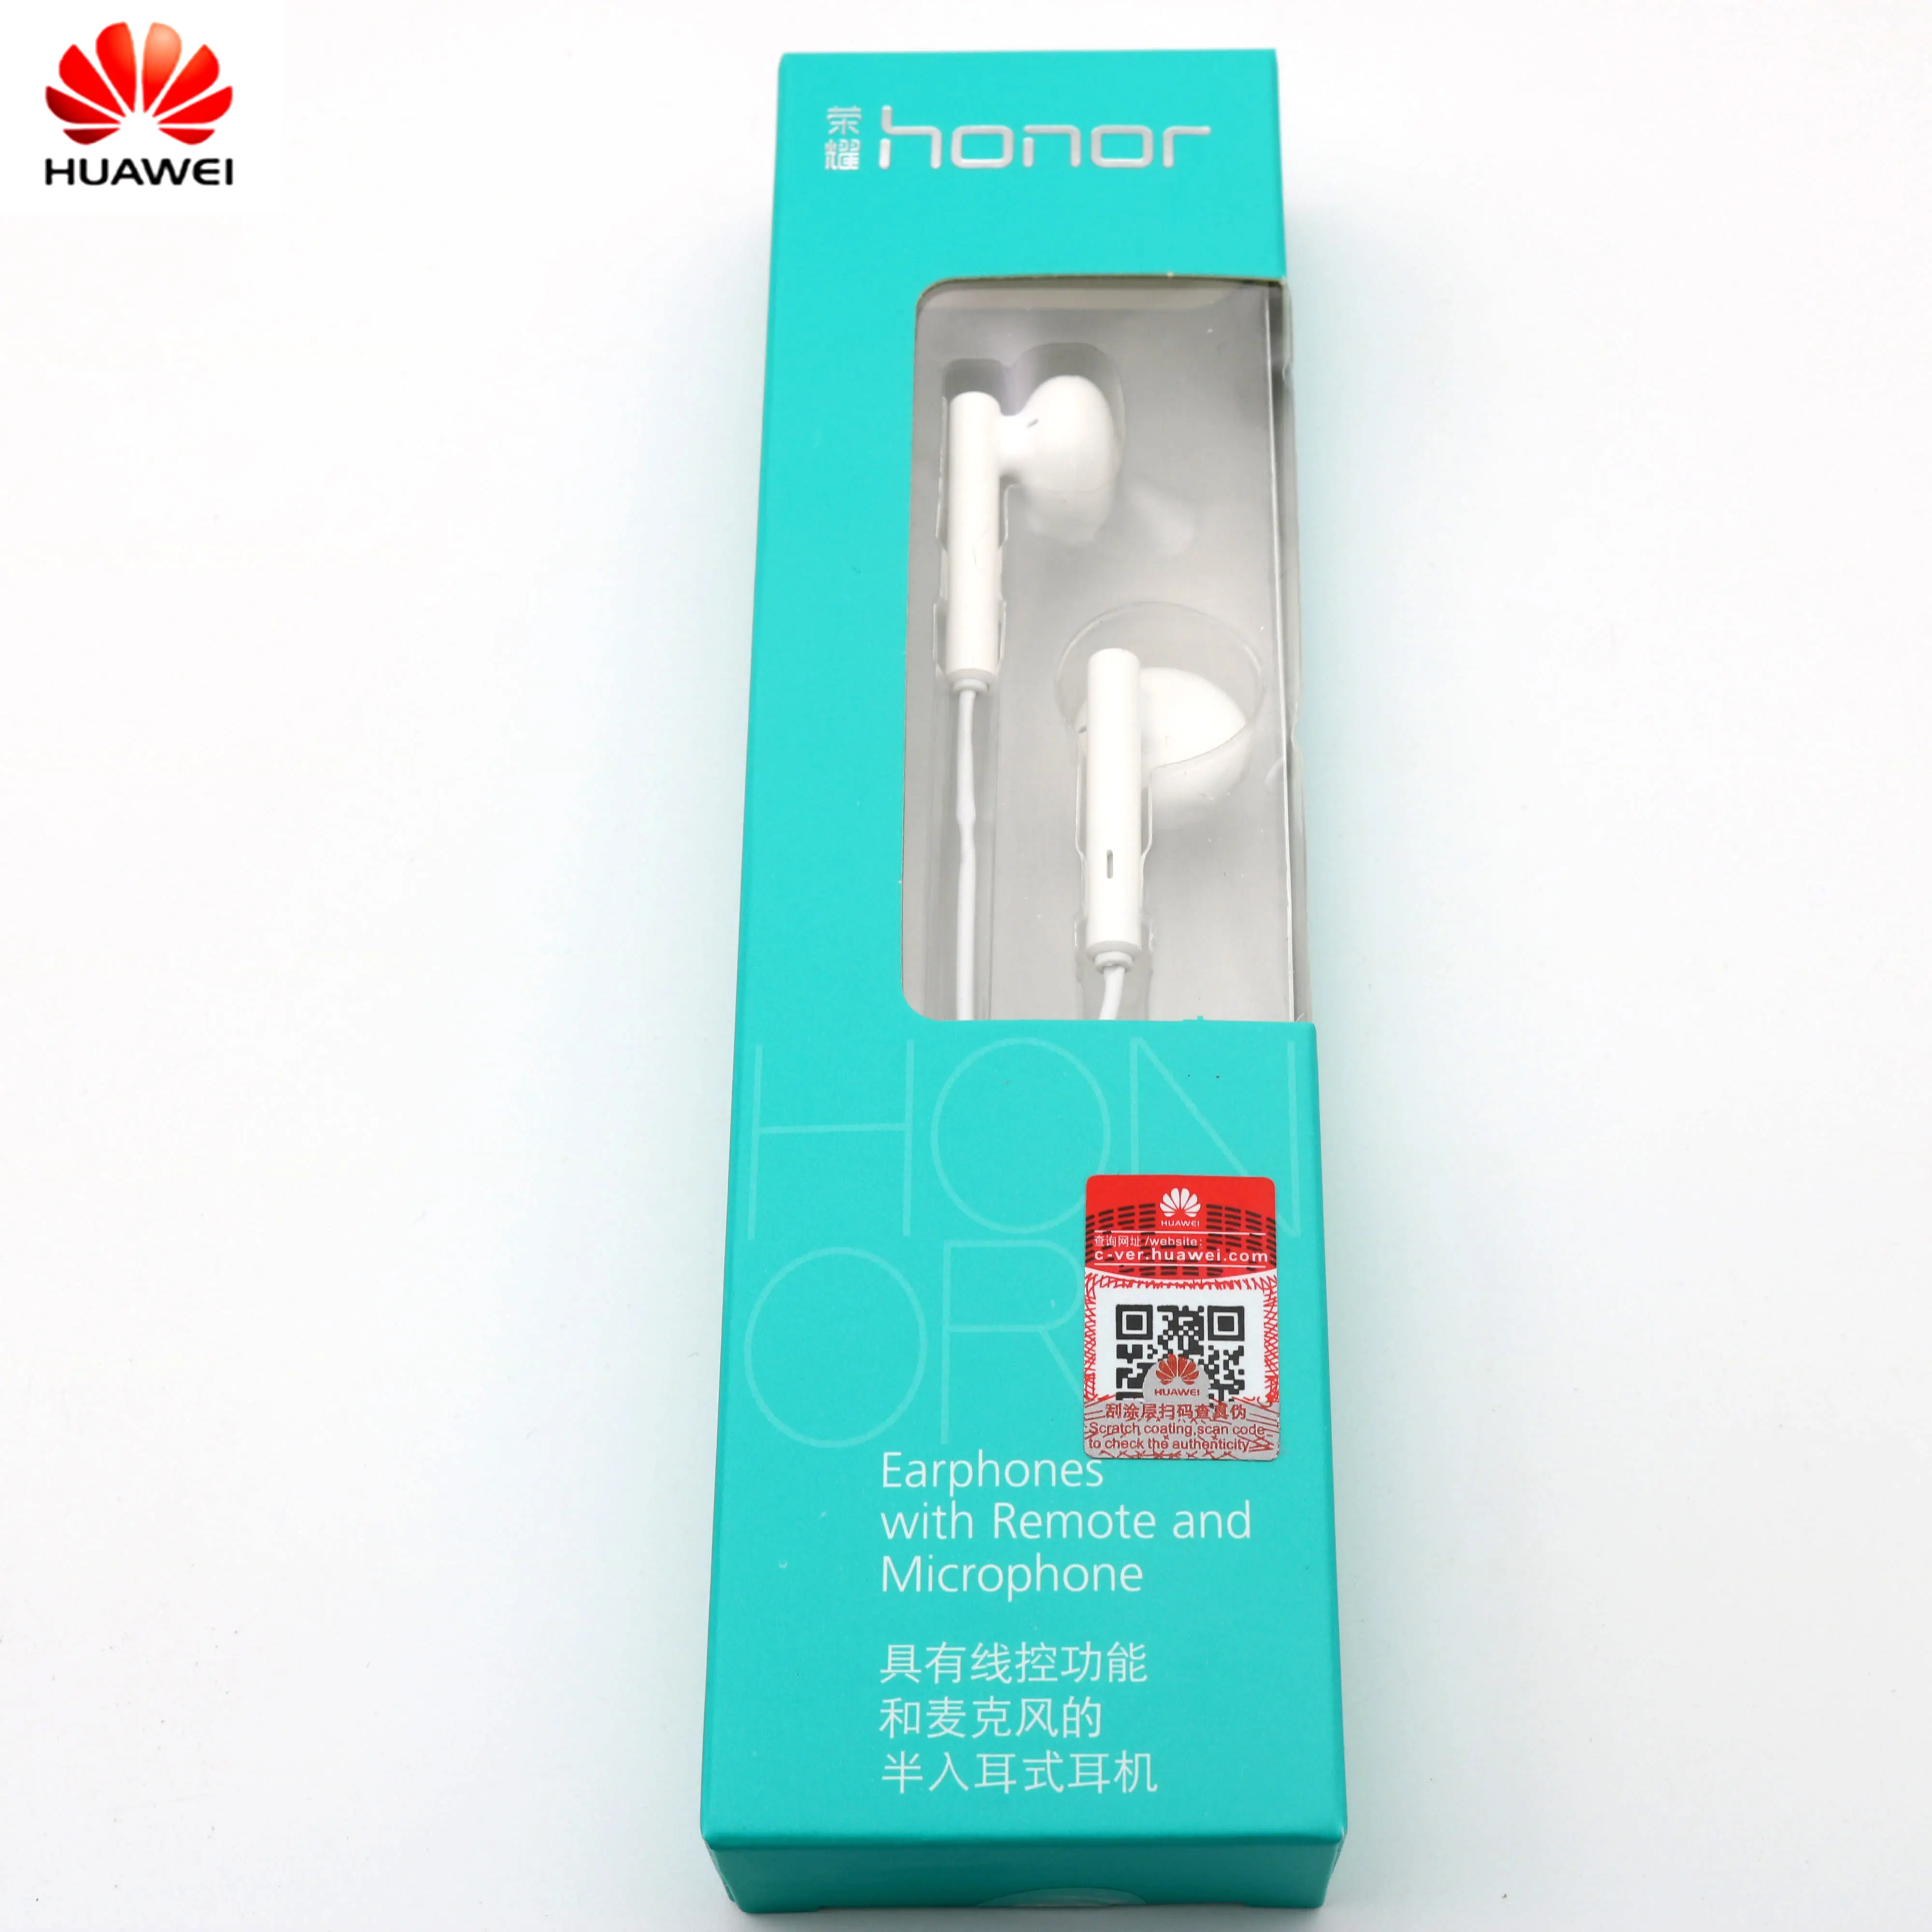 Original Huawei Honor AM115 Earphone With 1.1m Length wired Control Mic Volume Control Speaker suppor easy headset